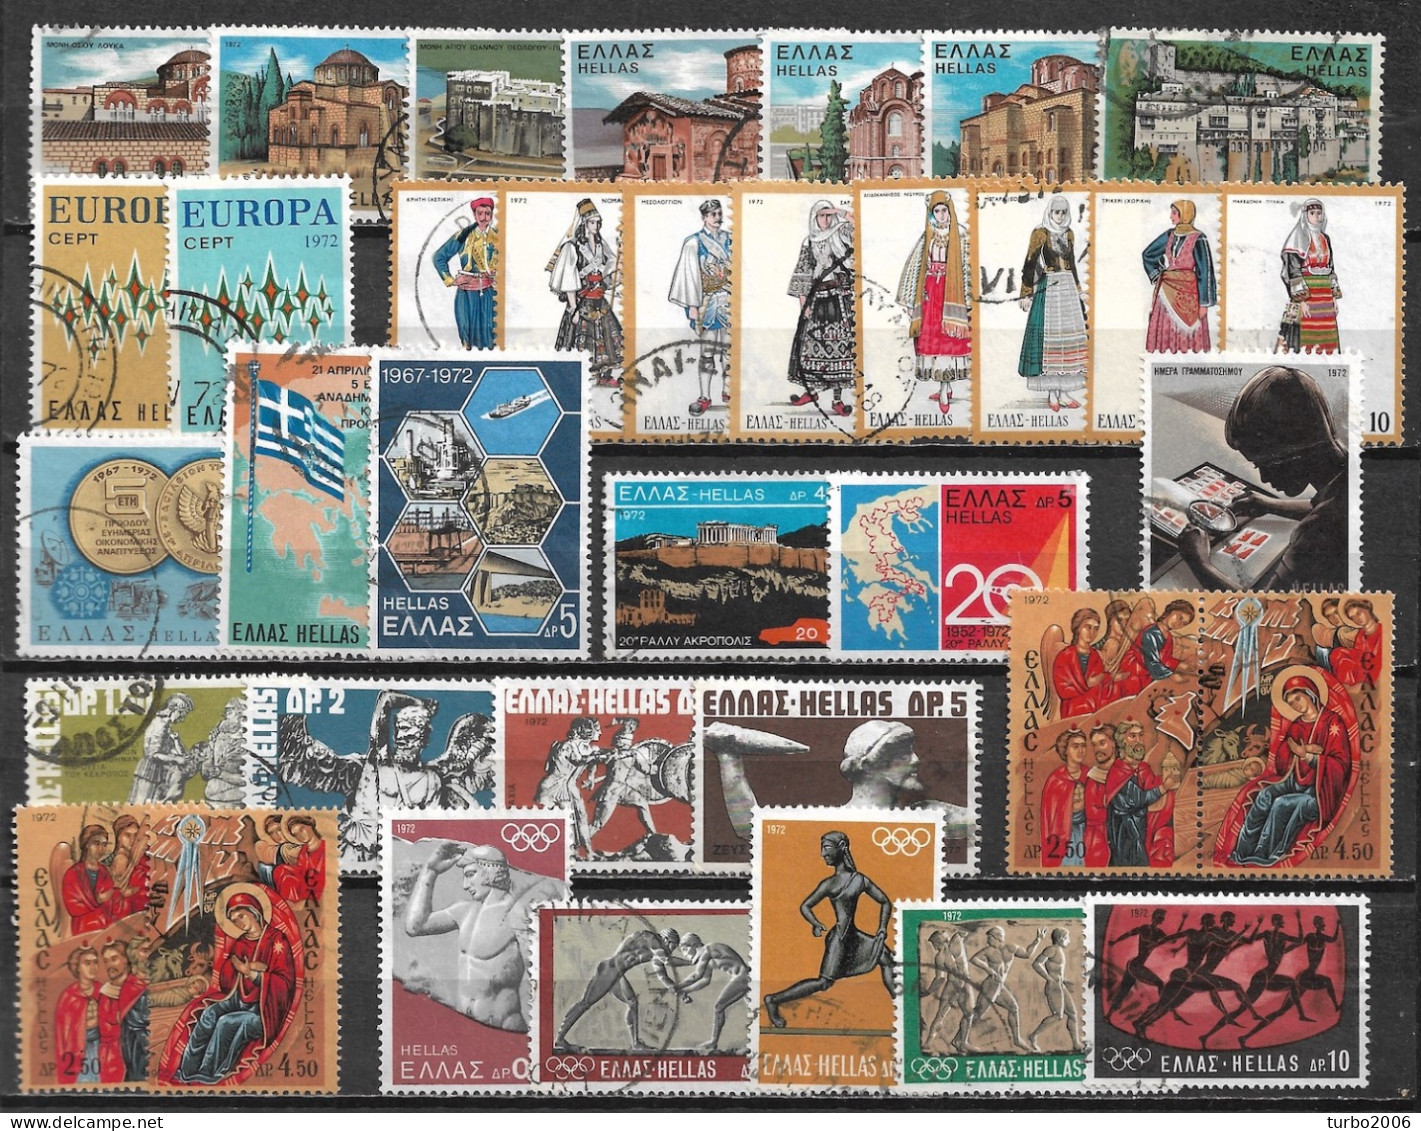 GREECE 1972 Complete All Sets Used Vl. 1153 / 1186 - Full Years